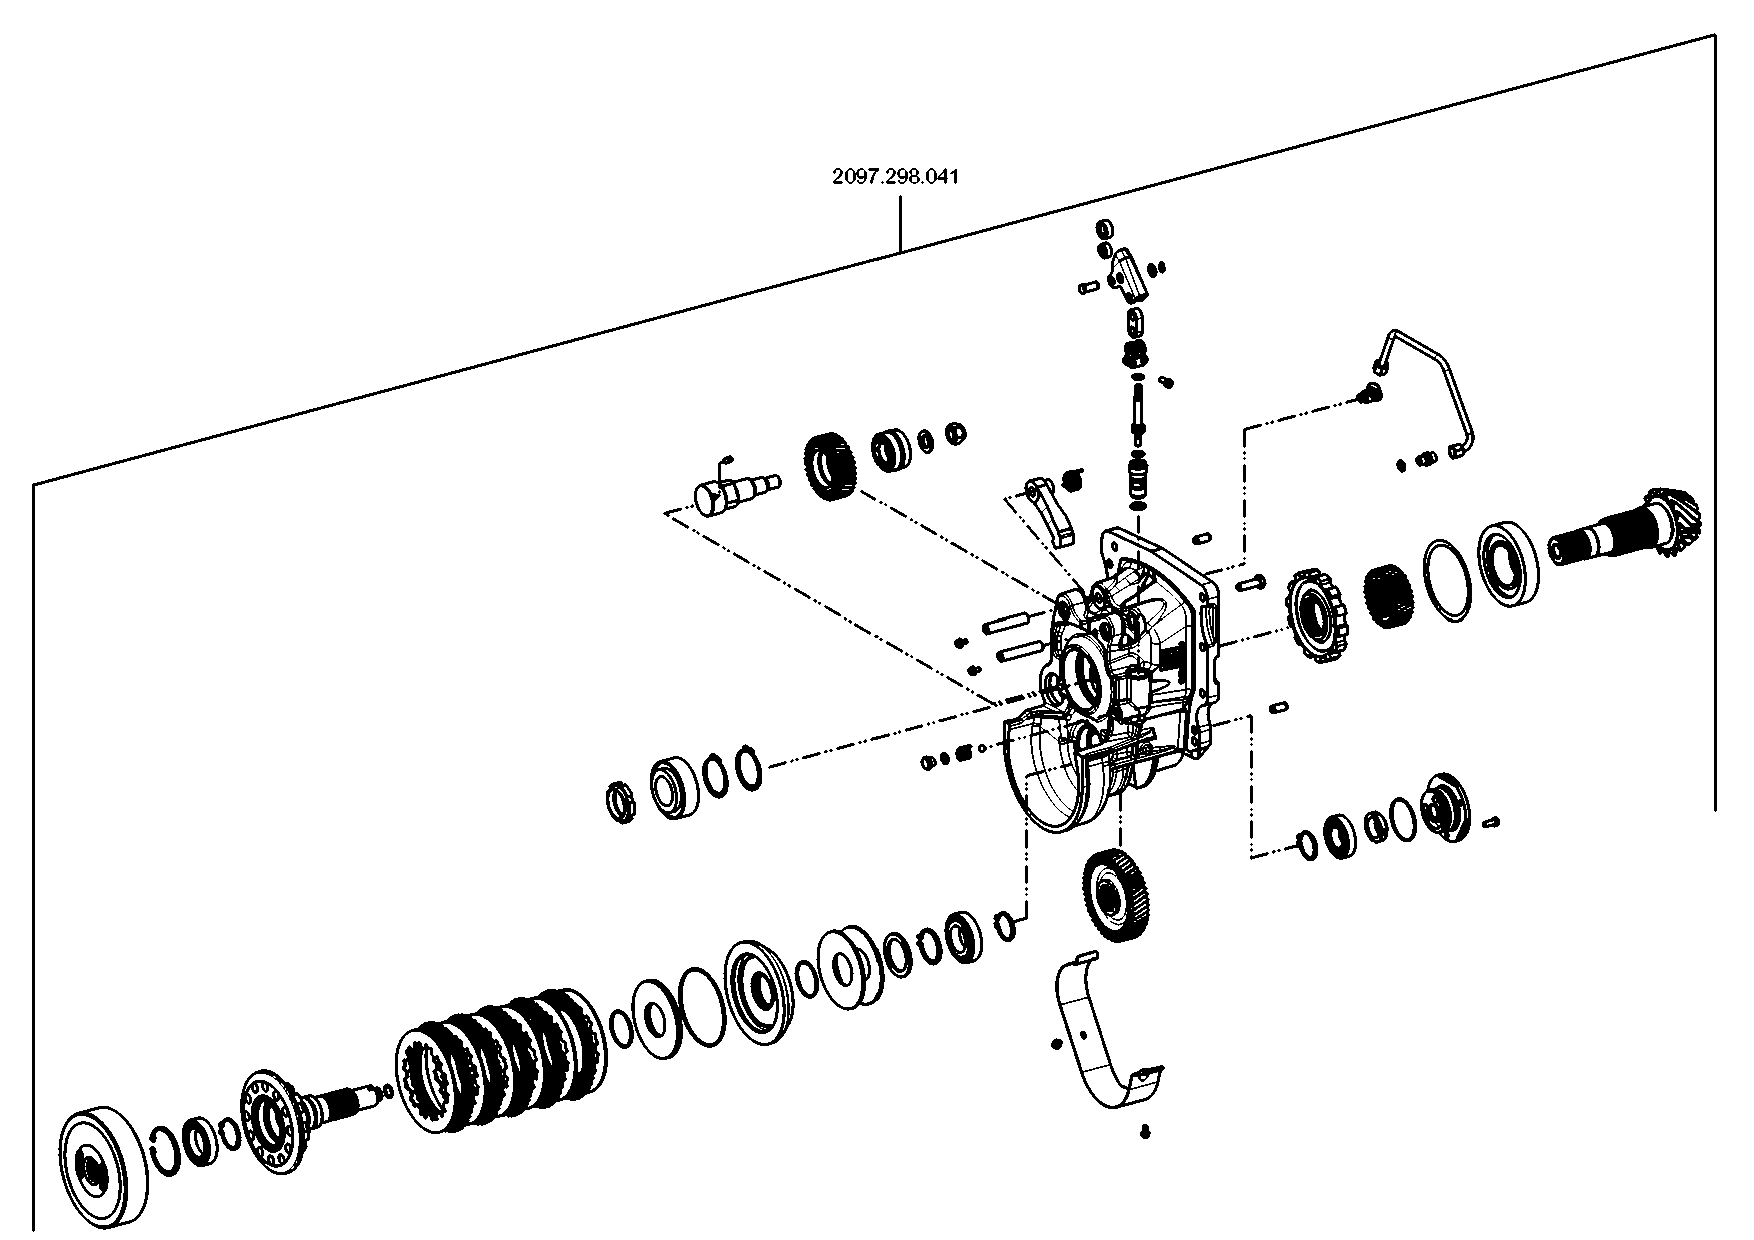 drawing for CNH NEW HOLLAND 0.900.1229.8 - LEG SPRING (figure 2)